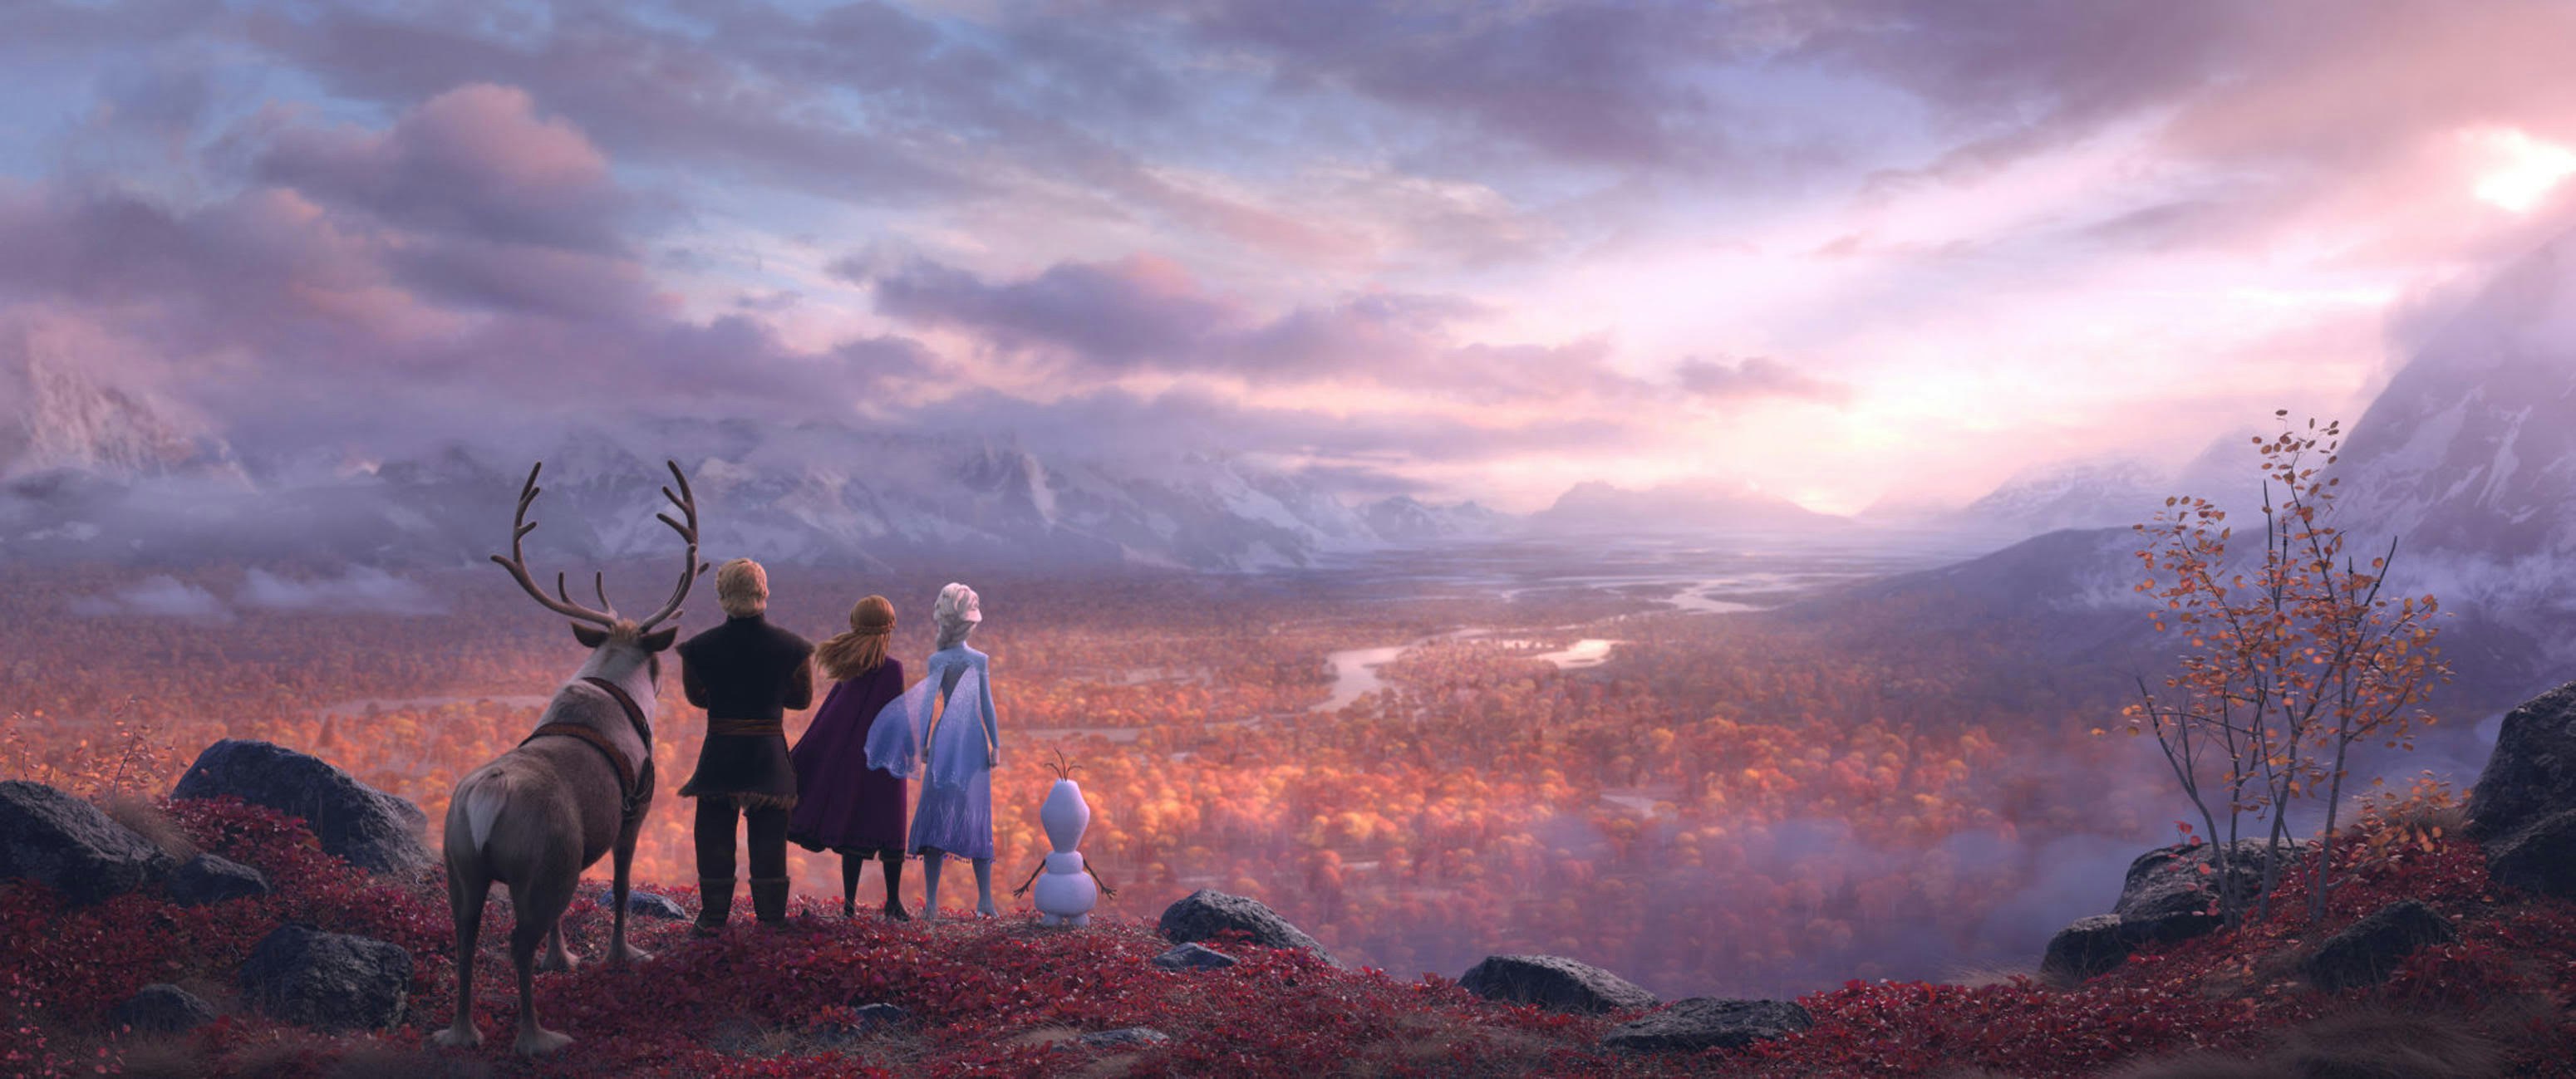 The cast of Frozen 2 overlook a gloomy, autumn forest